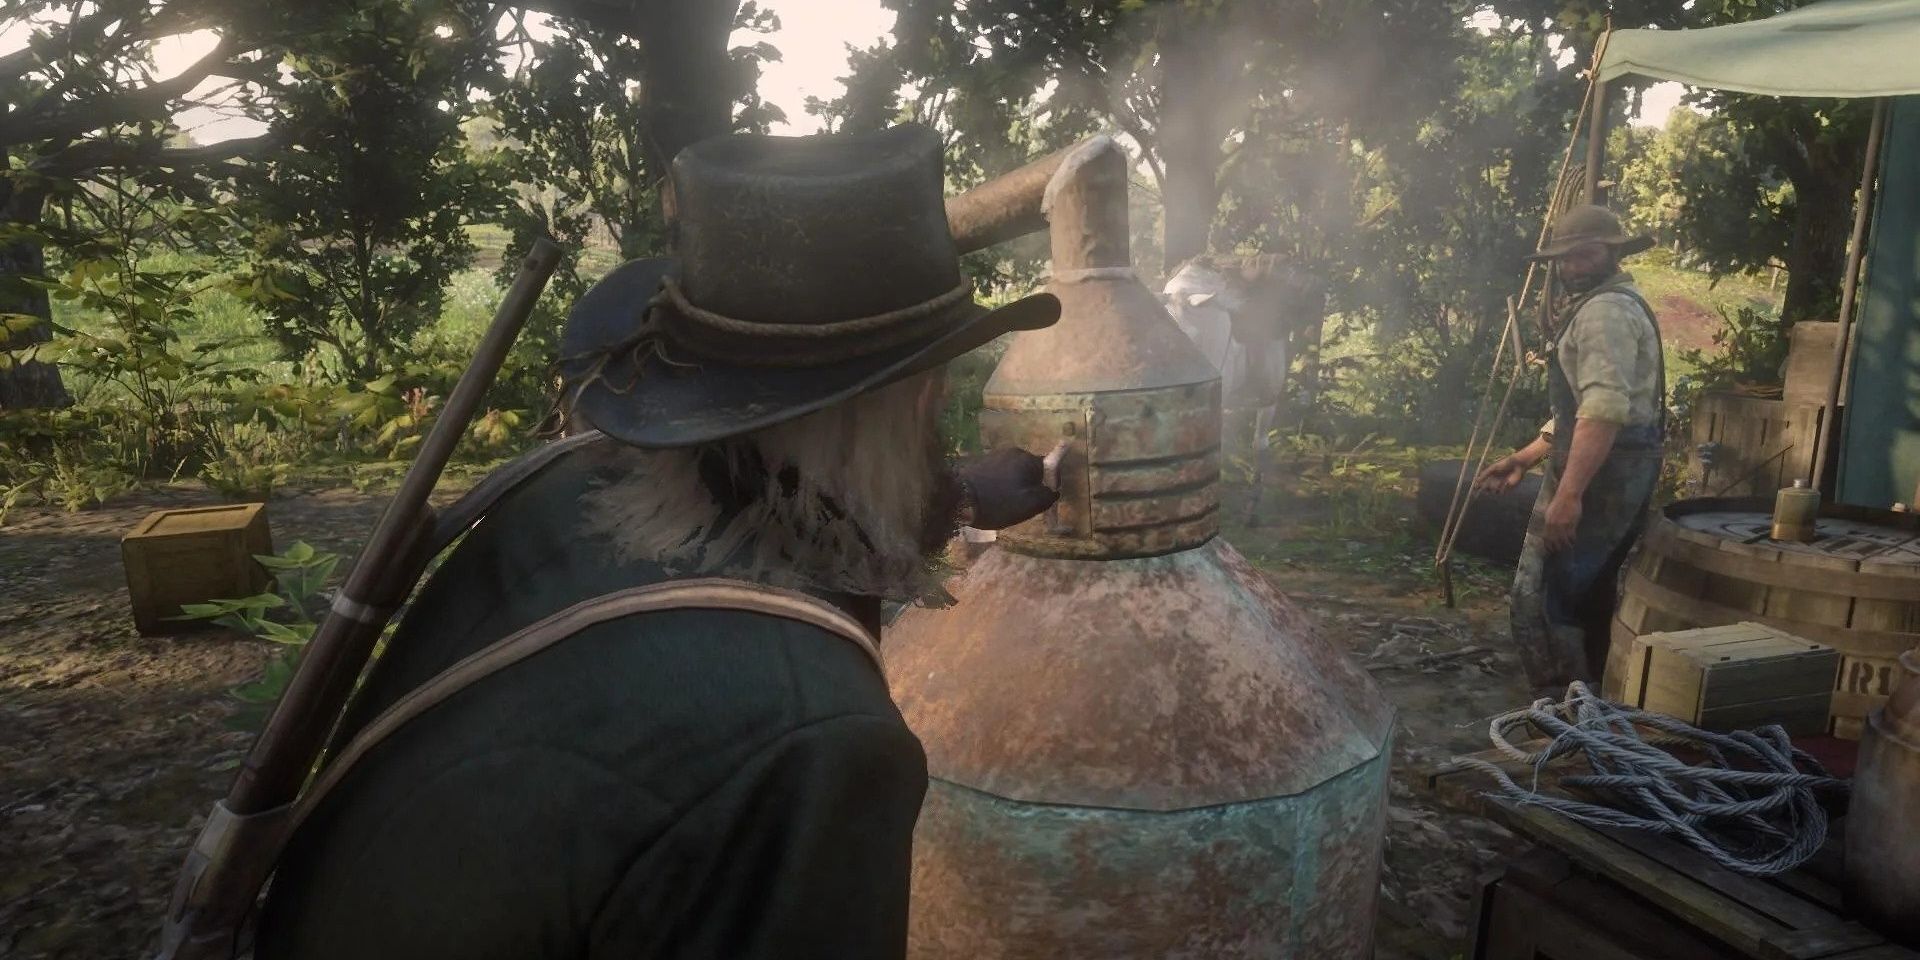 Arthur helping a duo create moonshine in the woods